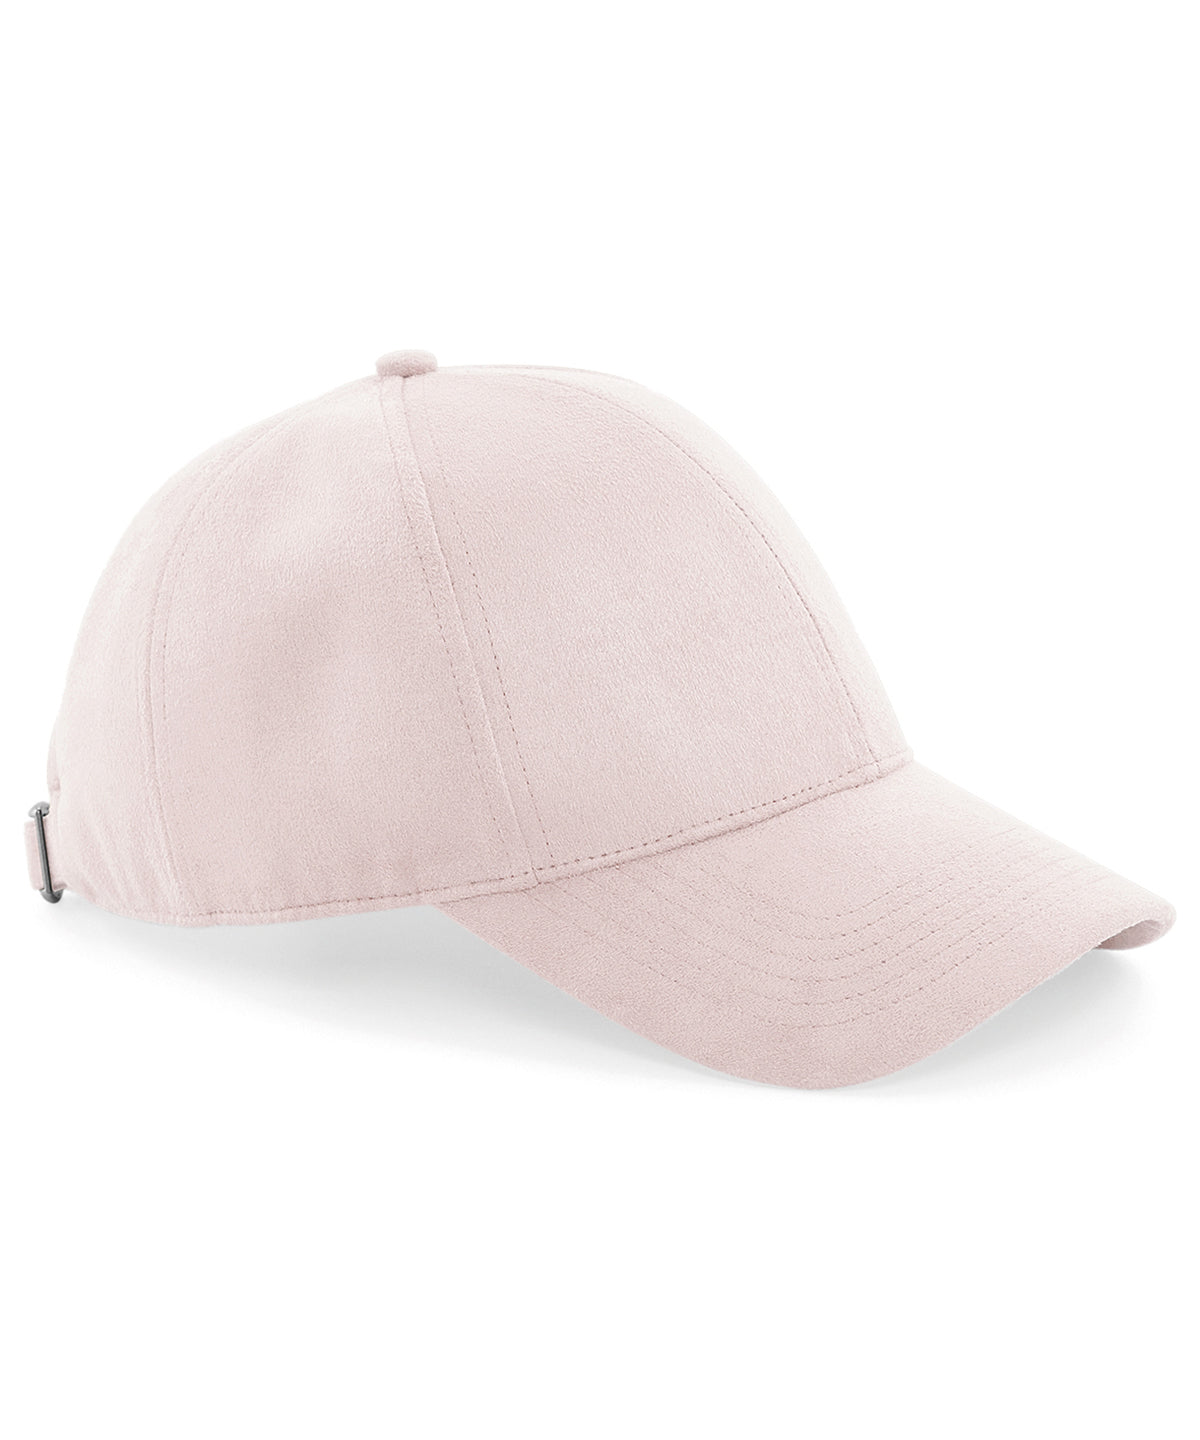 Personalised Caps - Light Pink Beechfield Faux suede 6-panel cap